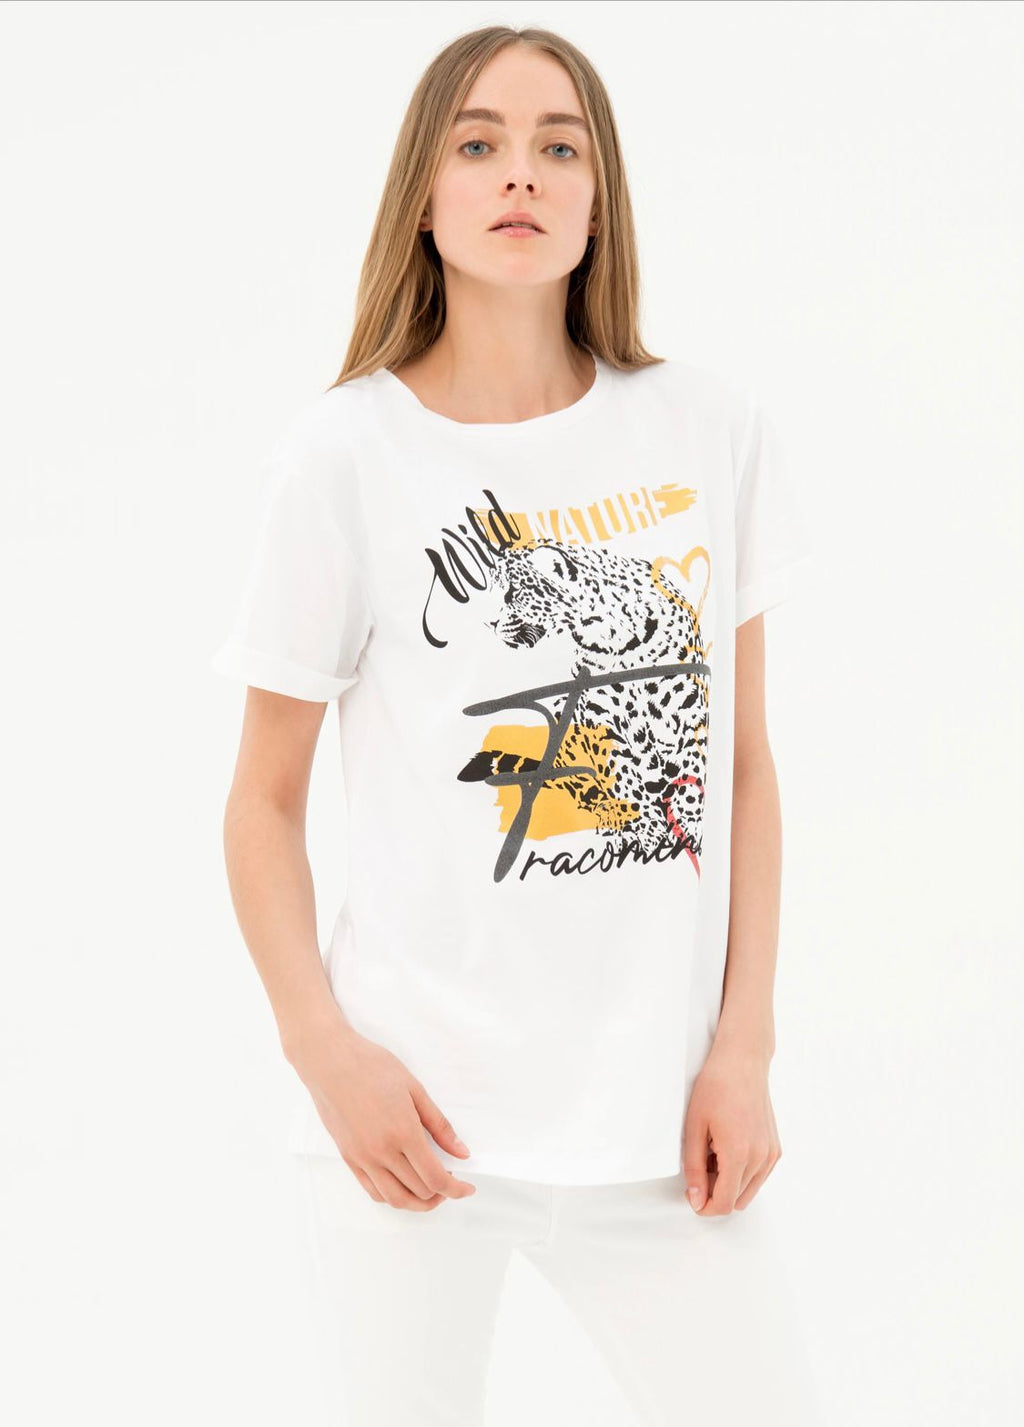 T-SHIRT FRACOMINA AMPIA CON STAMPA MULTICOLOR IN JERSEY ART:FR21ST3007J40110-278-FA-XS